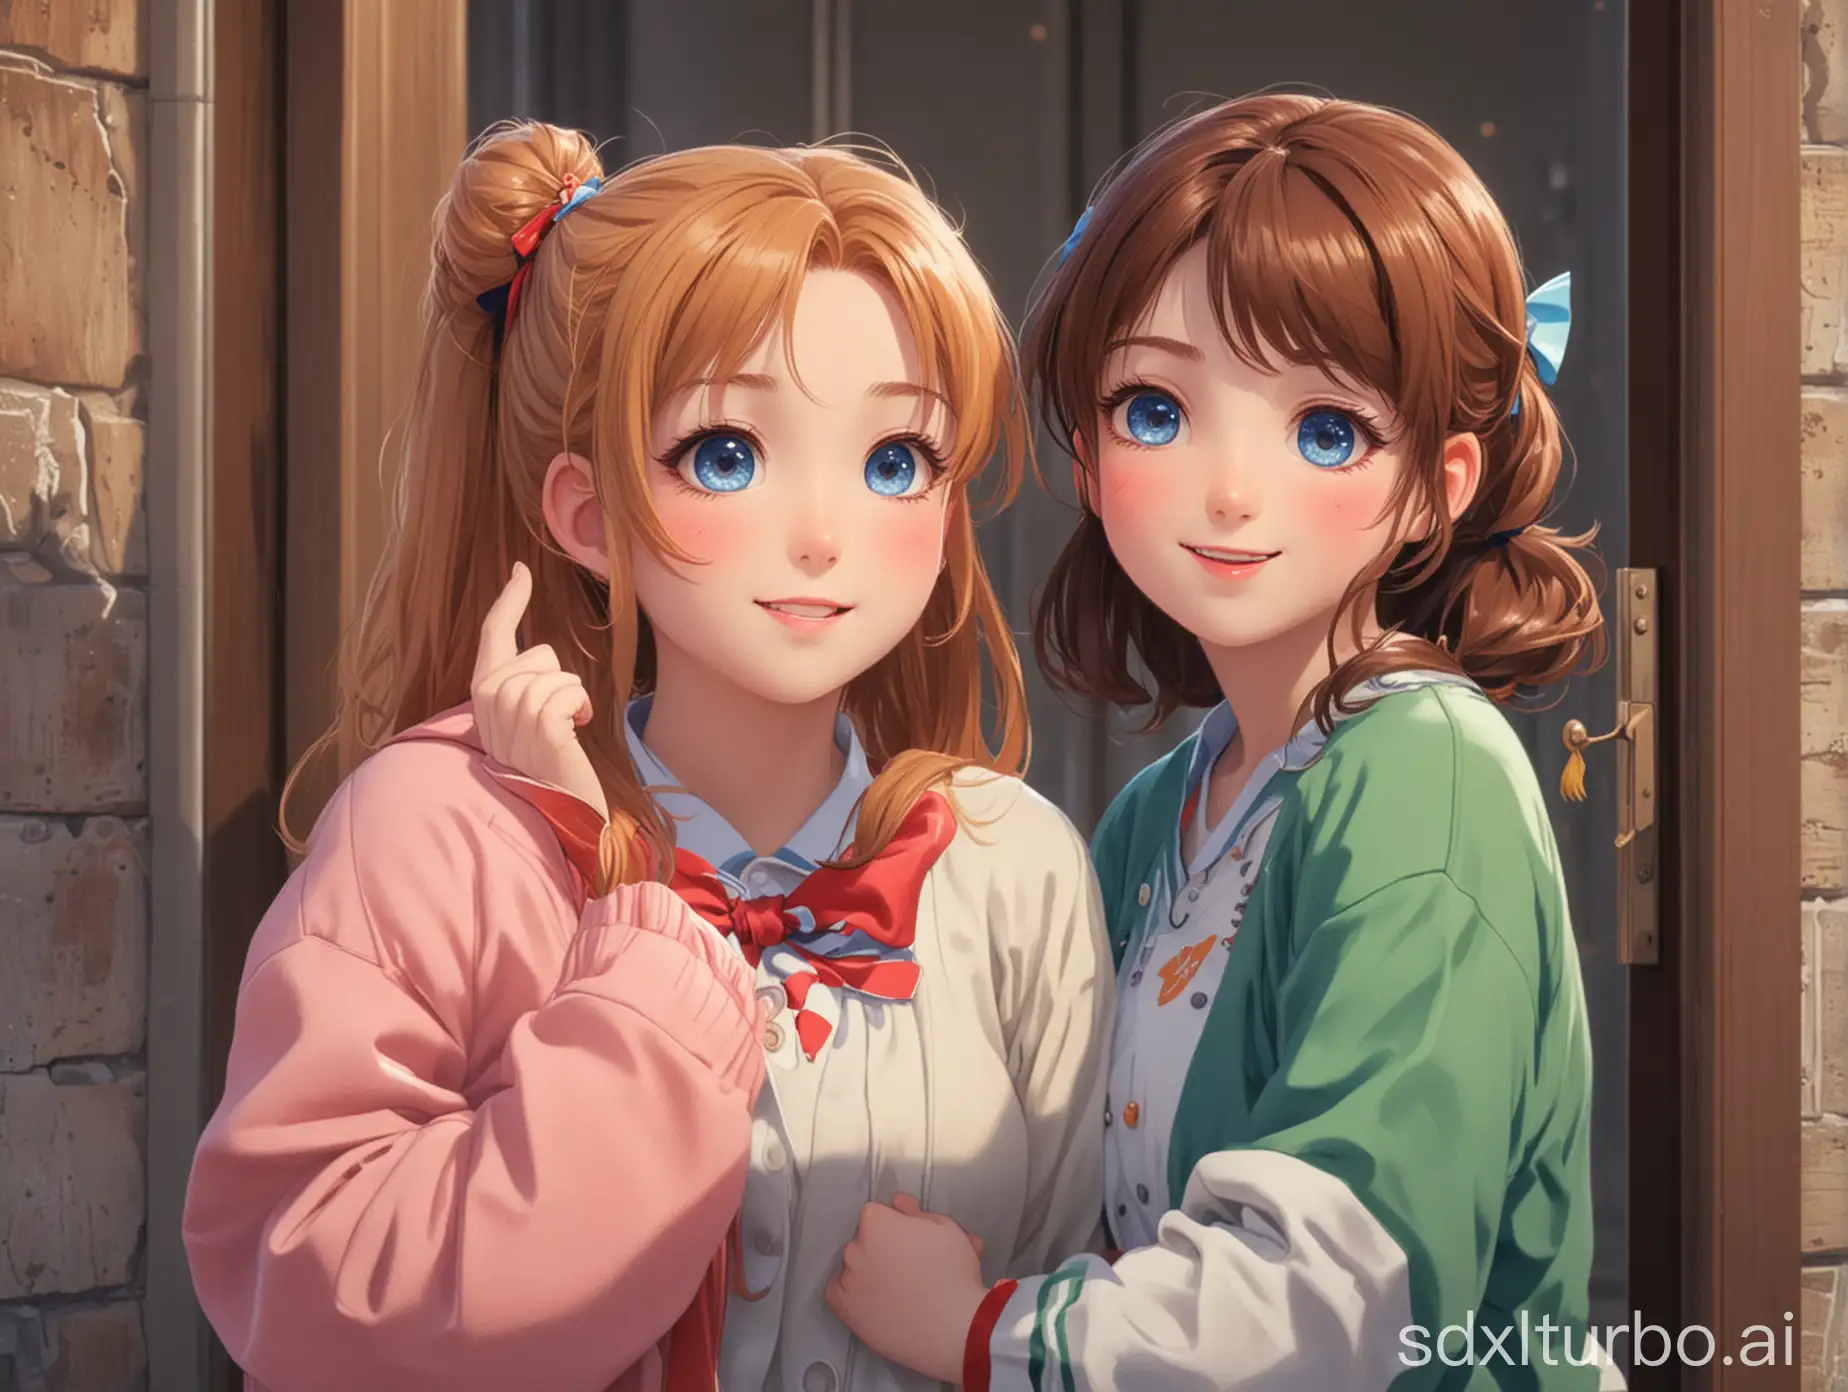 Two-Girls-Chatting-in-Front-of-a-Door-Lovely-Anime-Characters-with-Cheerful-Faces